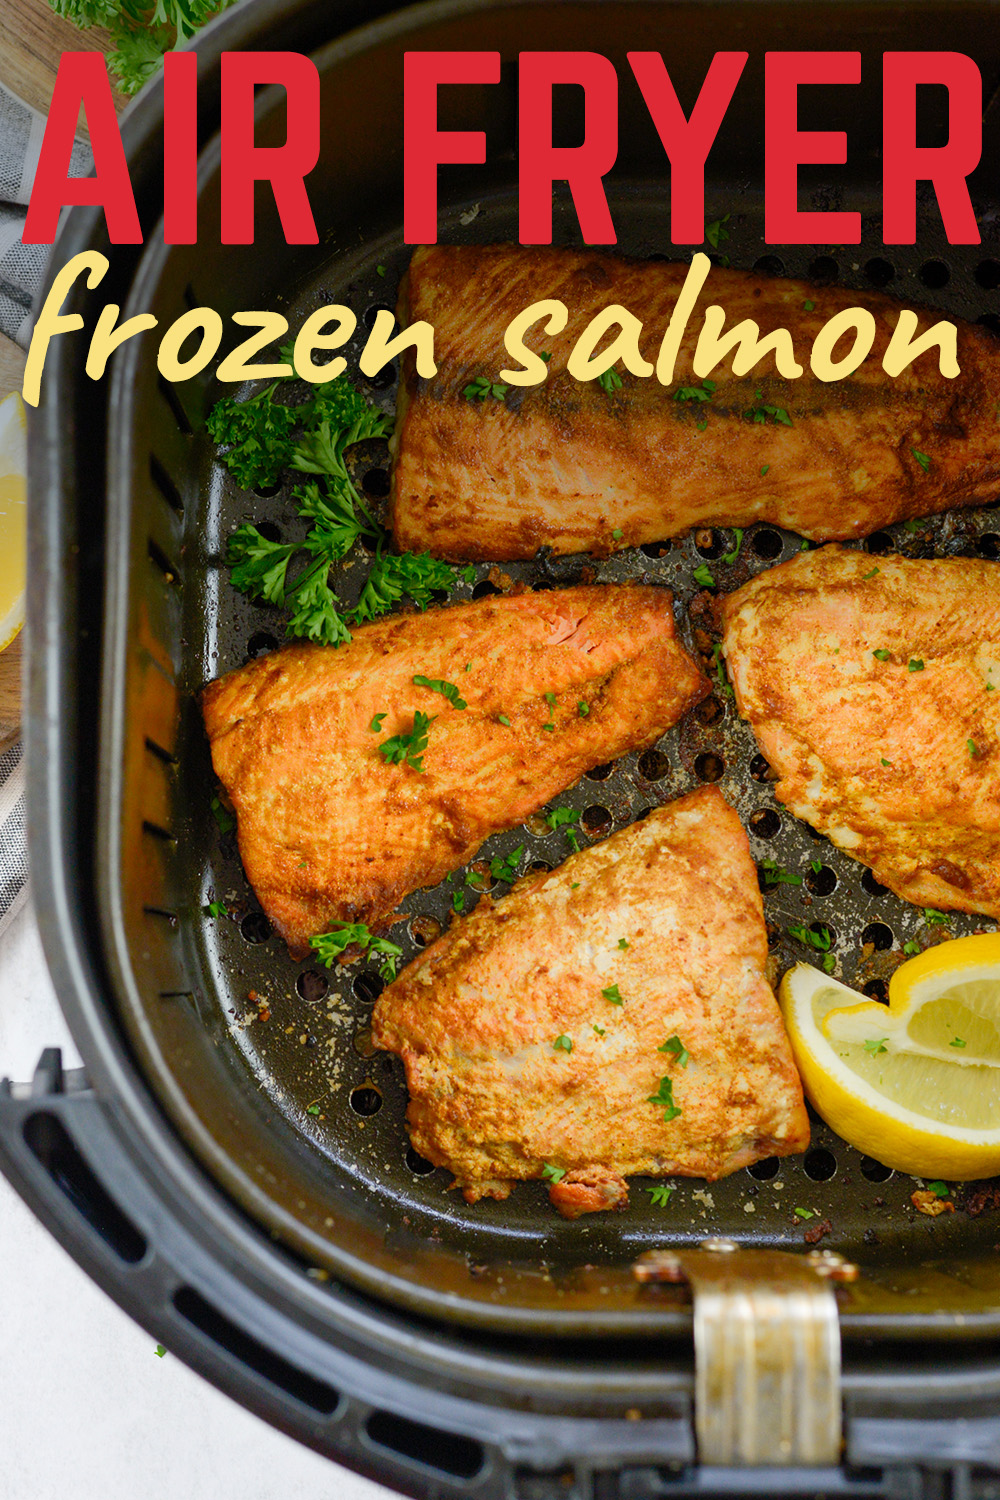 Four salmon fillets and a couple lemon wedges in an air fryer.